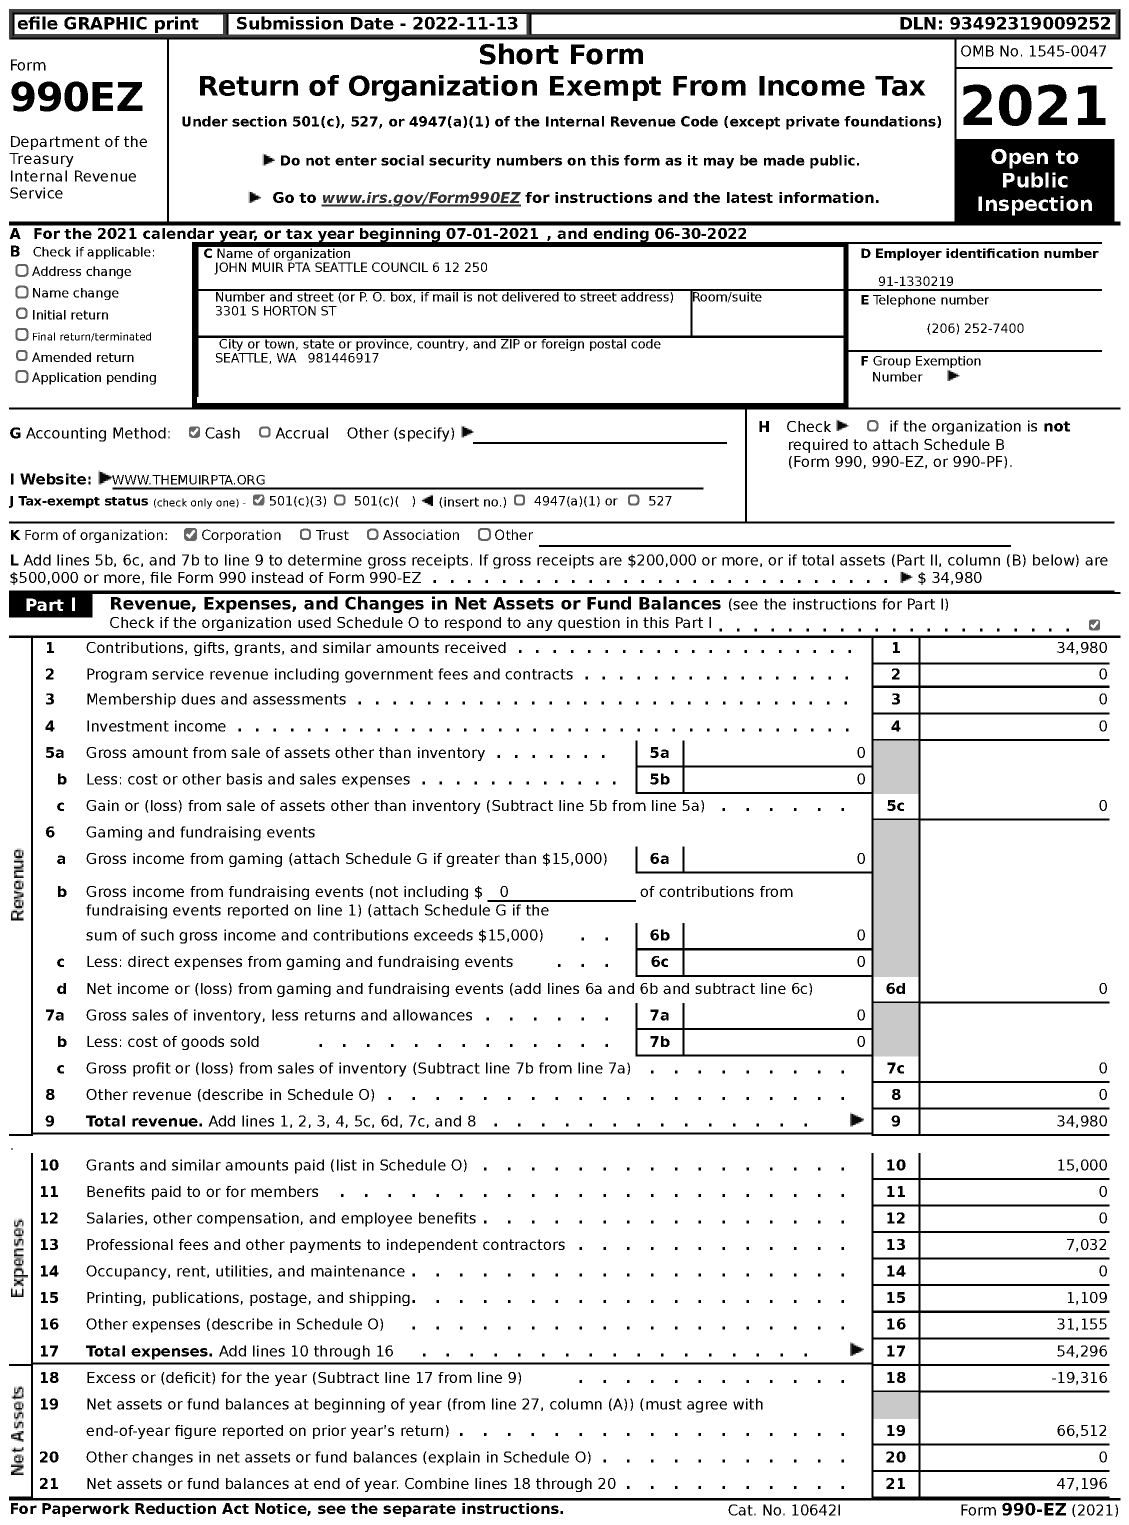 Image of first page of 2021 Form 990EZ for John Muir PTA Seattle Council 6 12 250